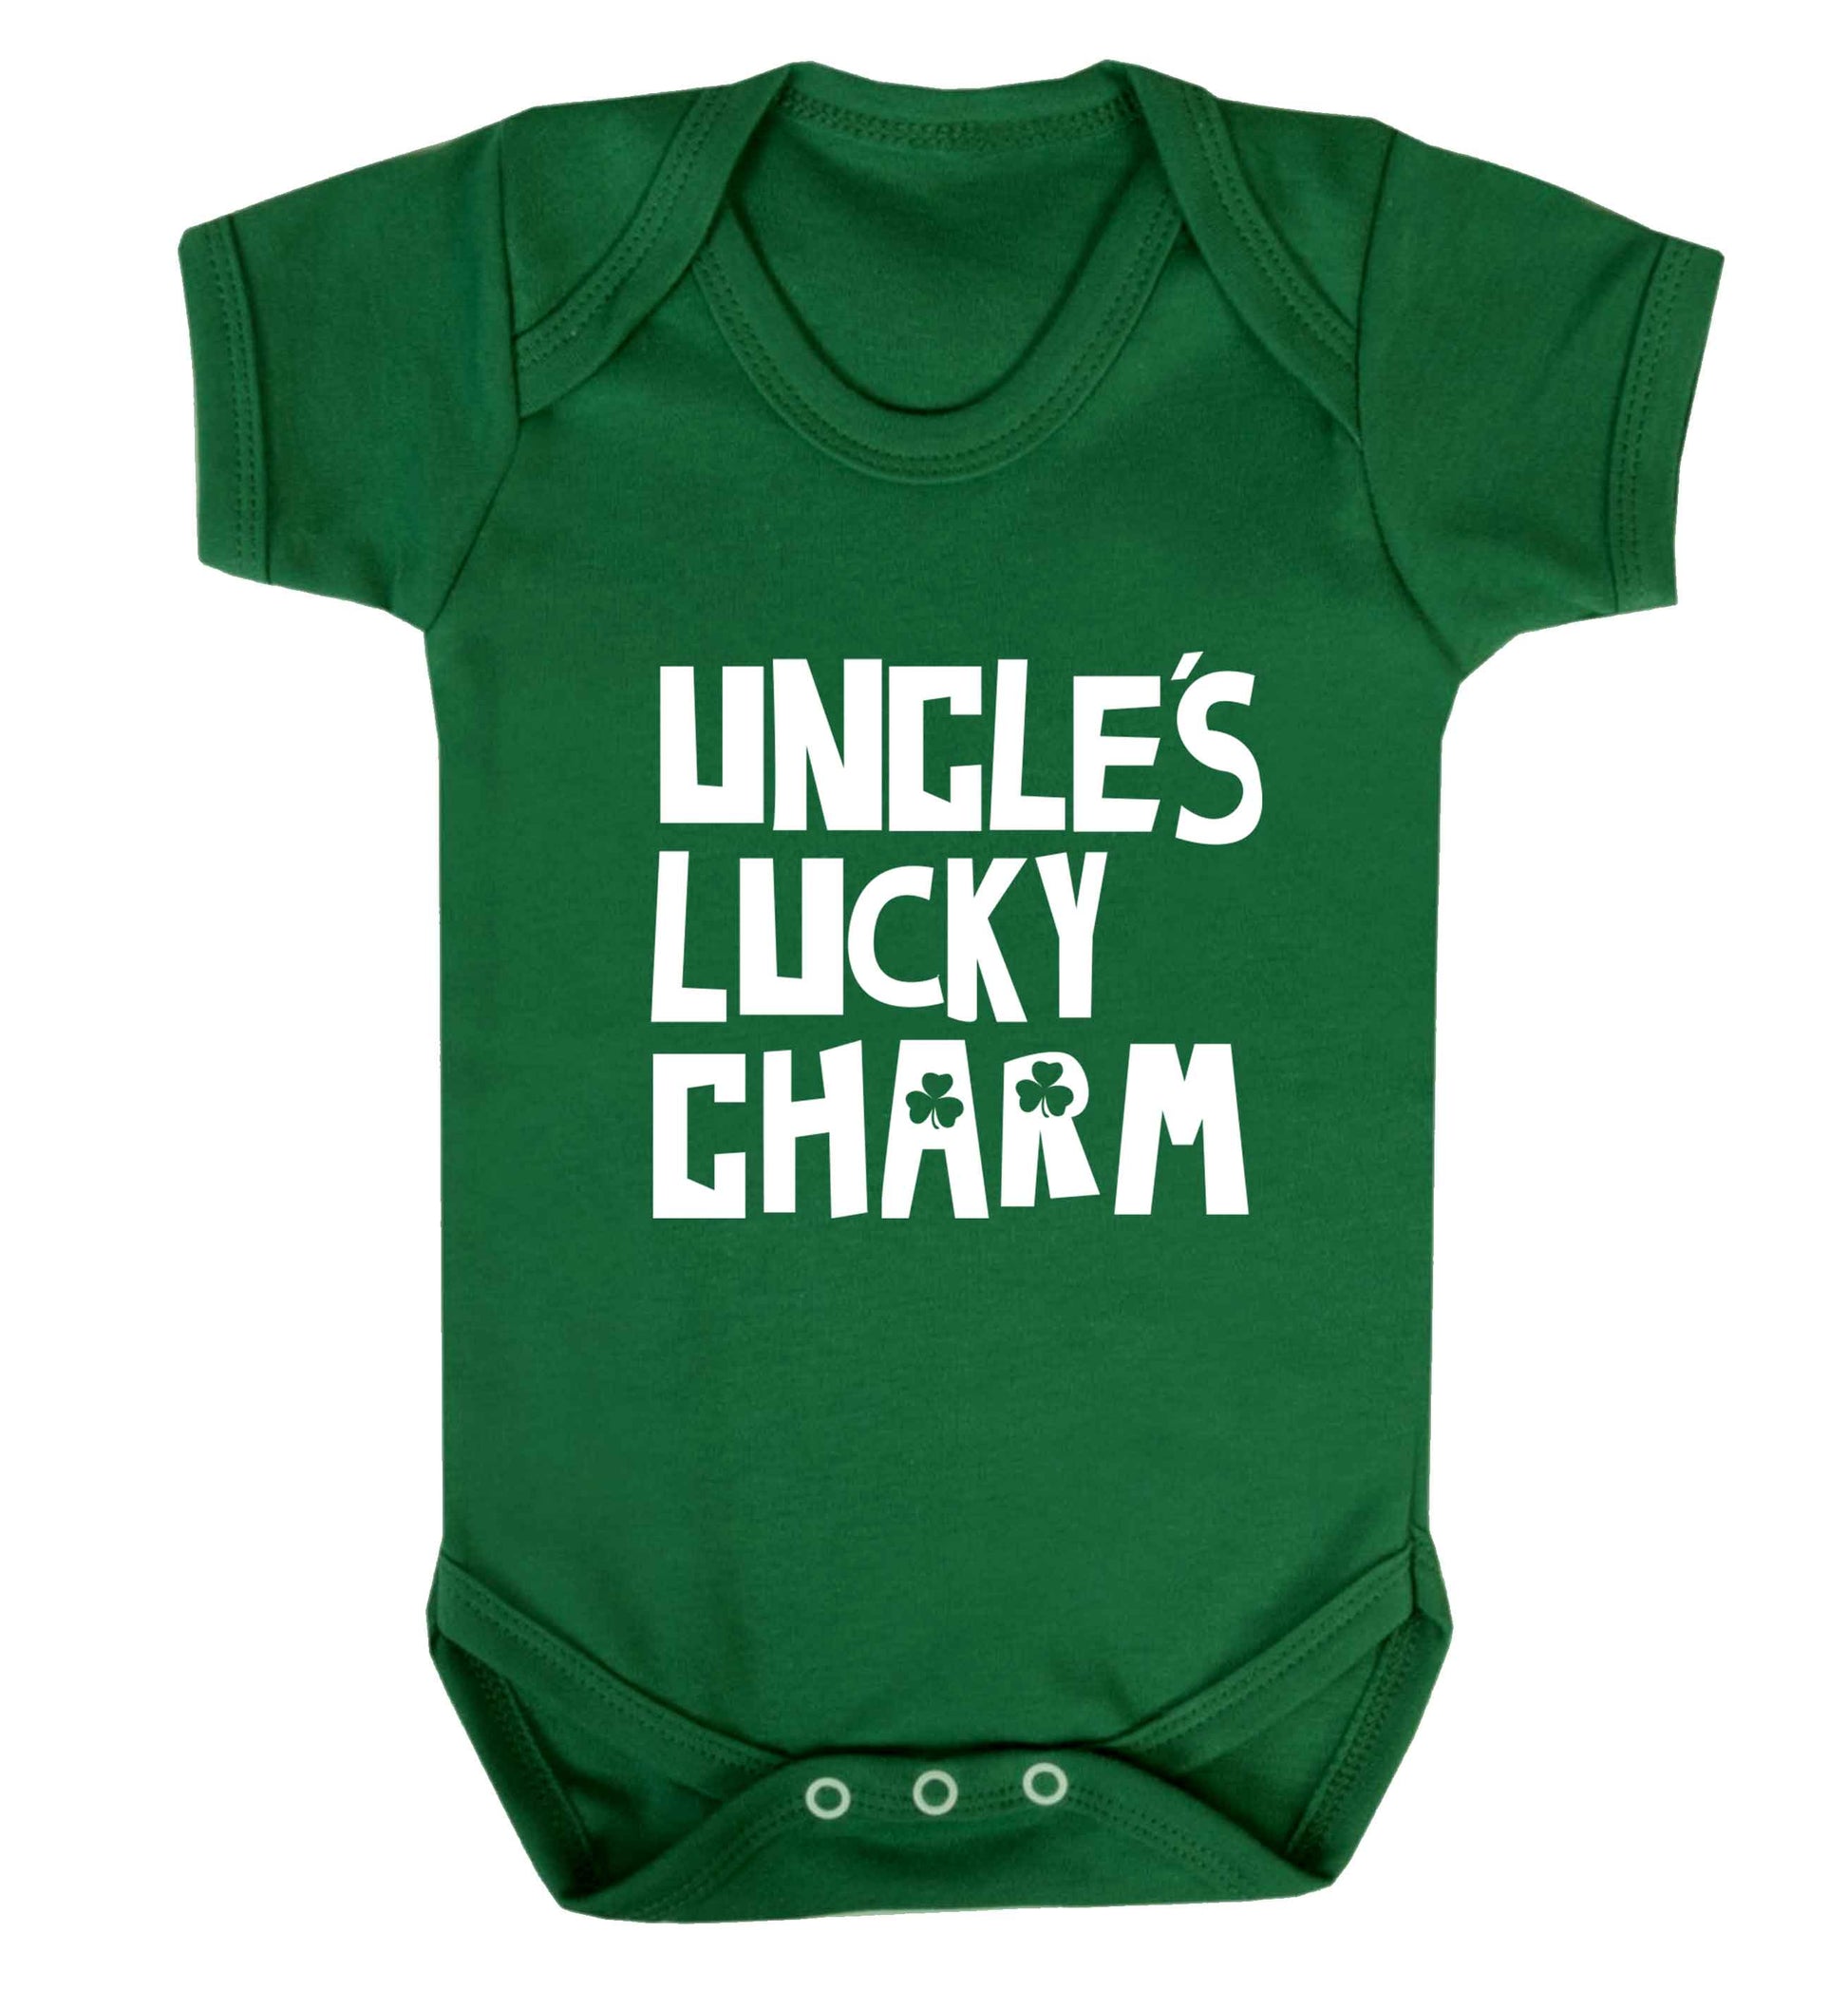 Uncles lucky charm baby vest green 18-24 months